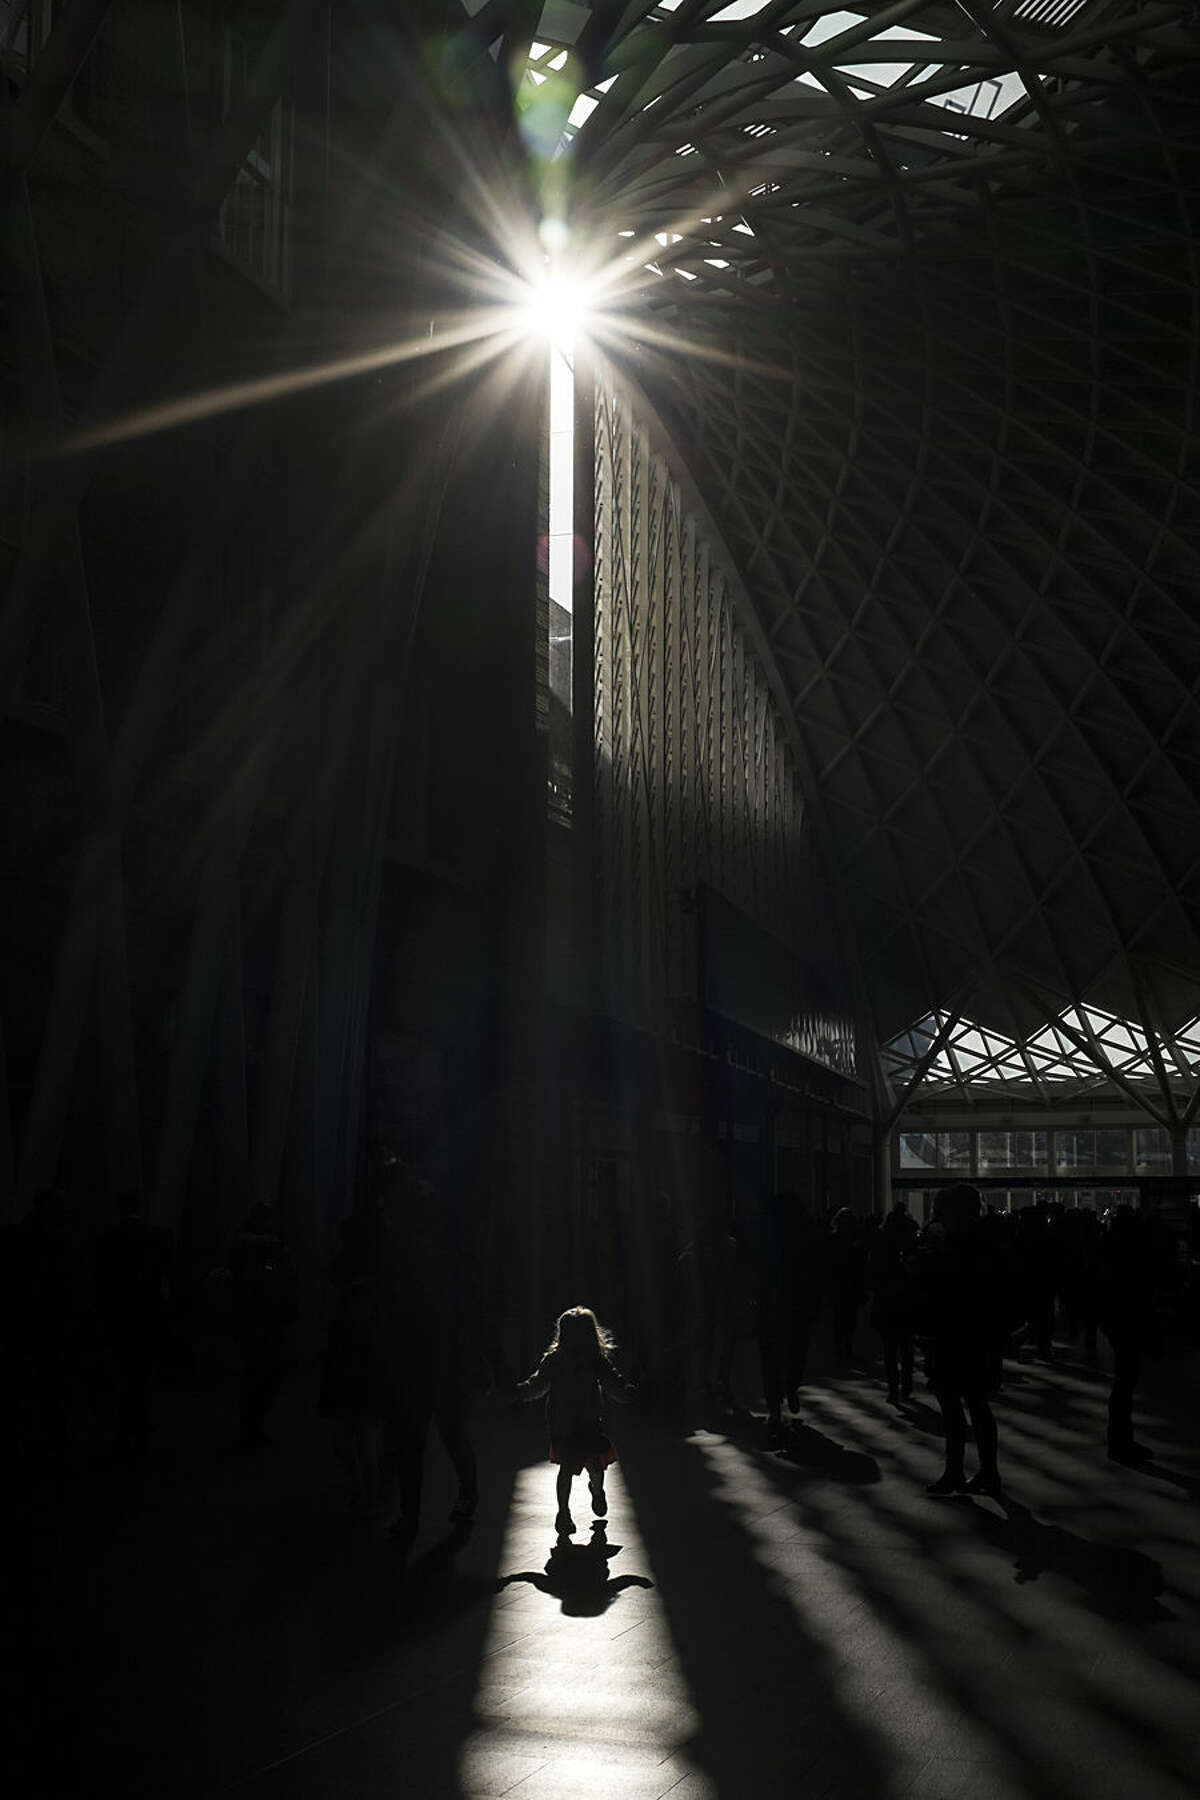 A girl walks in a shaft of light on the main concourse at King's Cross railway station, London, Wednesday, Feb. 18, 2015. More than 29 million passengers annually rely on mainline train services from King's Cross, according to the British Office of Rail Regulation, making it the ninth busiest station in the country. (AP Photo/David Azia)